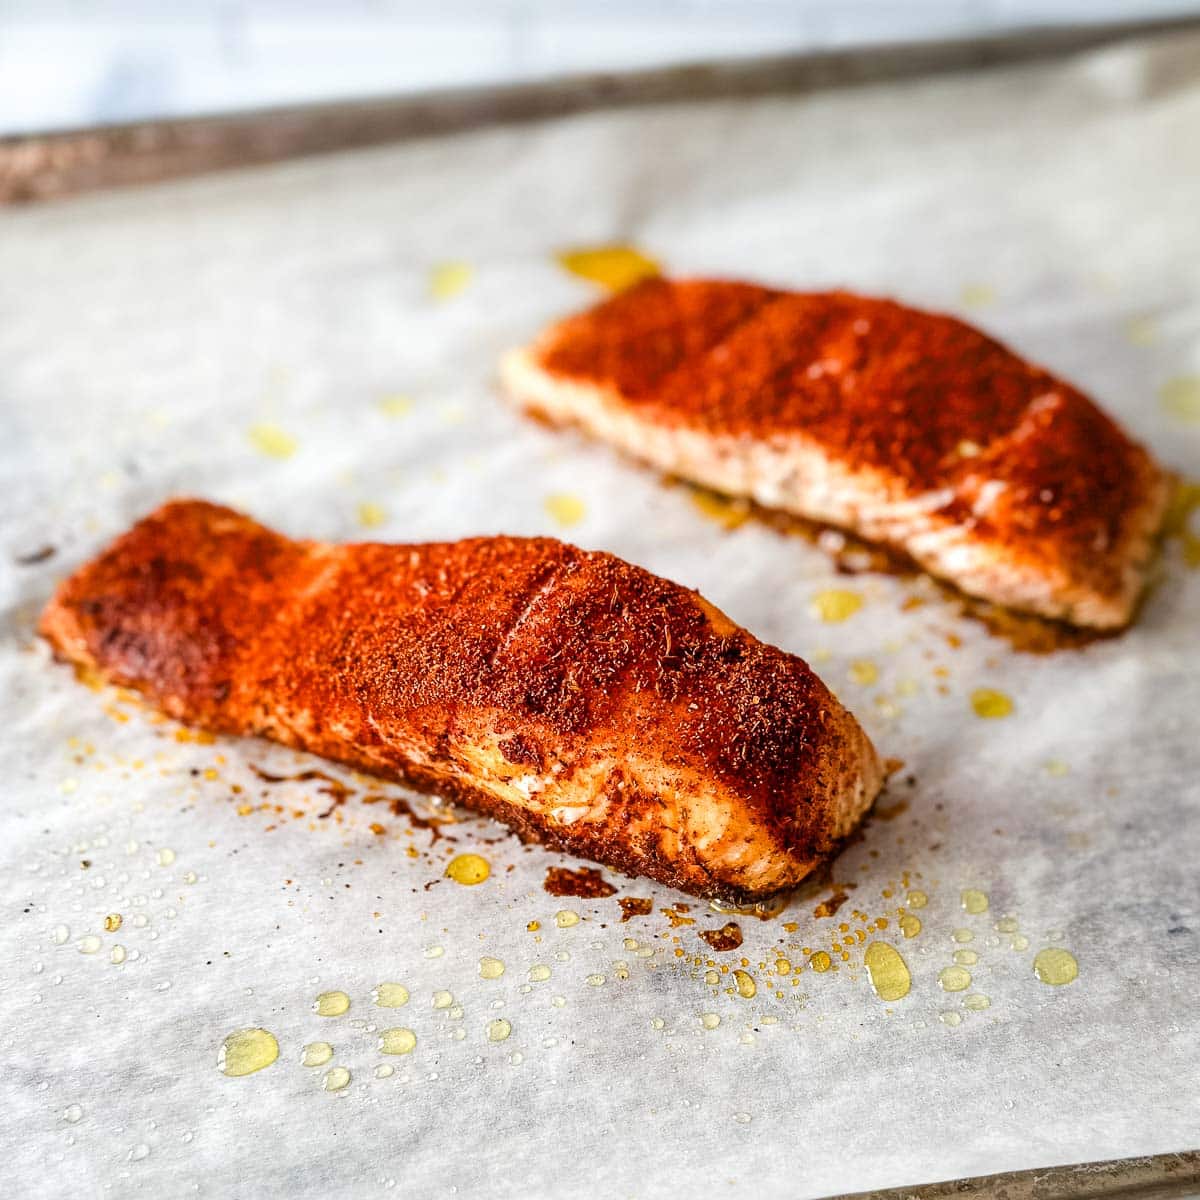 Two baked blackened salmon fillets on a baking sheet.